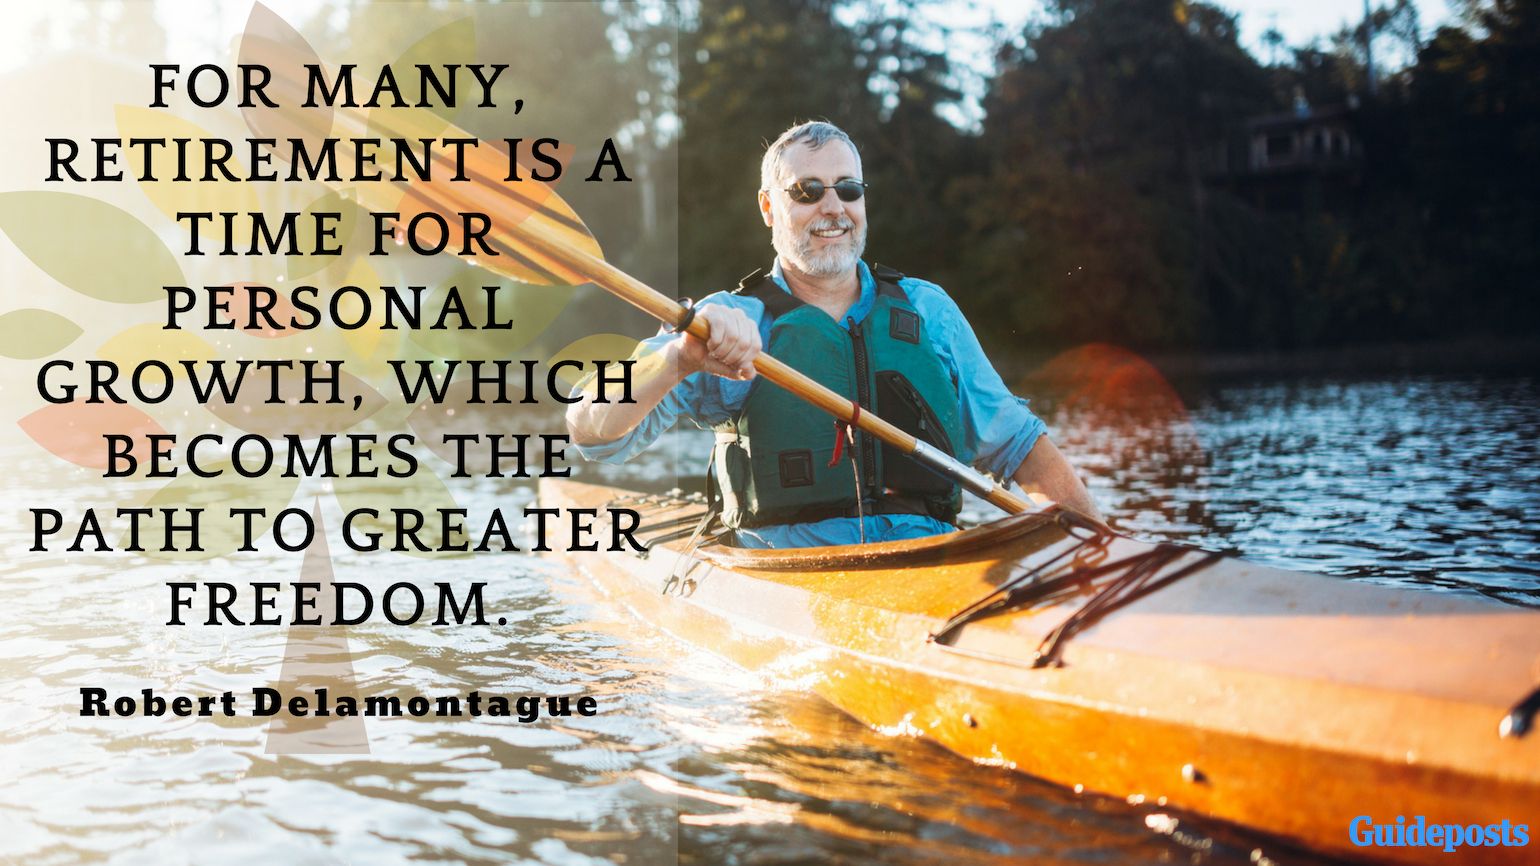 Inspirational Quotes for Retirement: “For many, retirement is a time for personal growth, which becomes the path to greater freedom.” – Robert Delamontague Better Living Life Advice